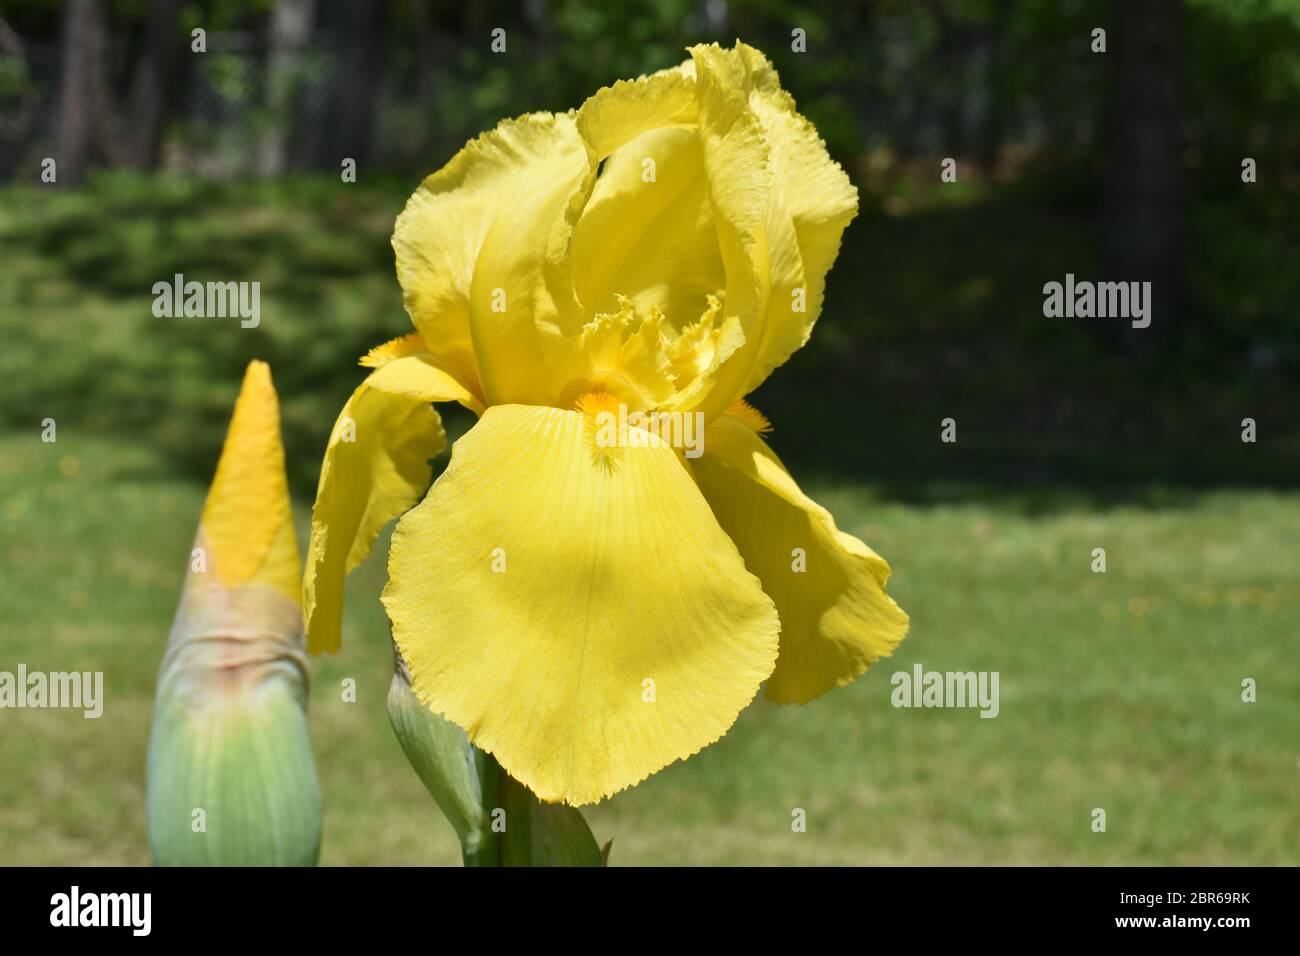 Large yellow iris blooms on a blurred green background Stock Photo